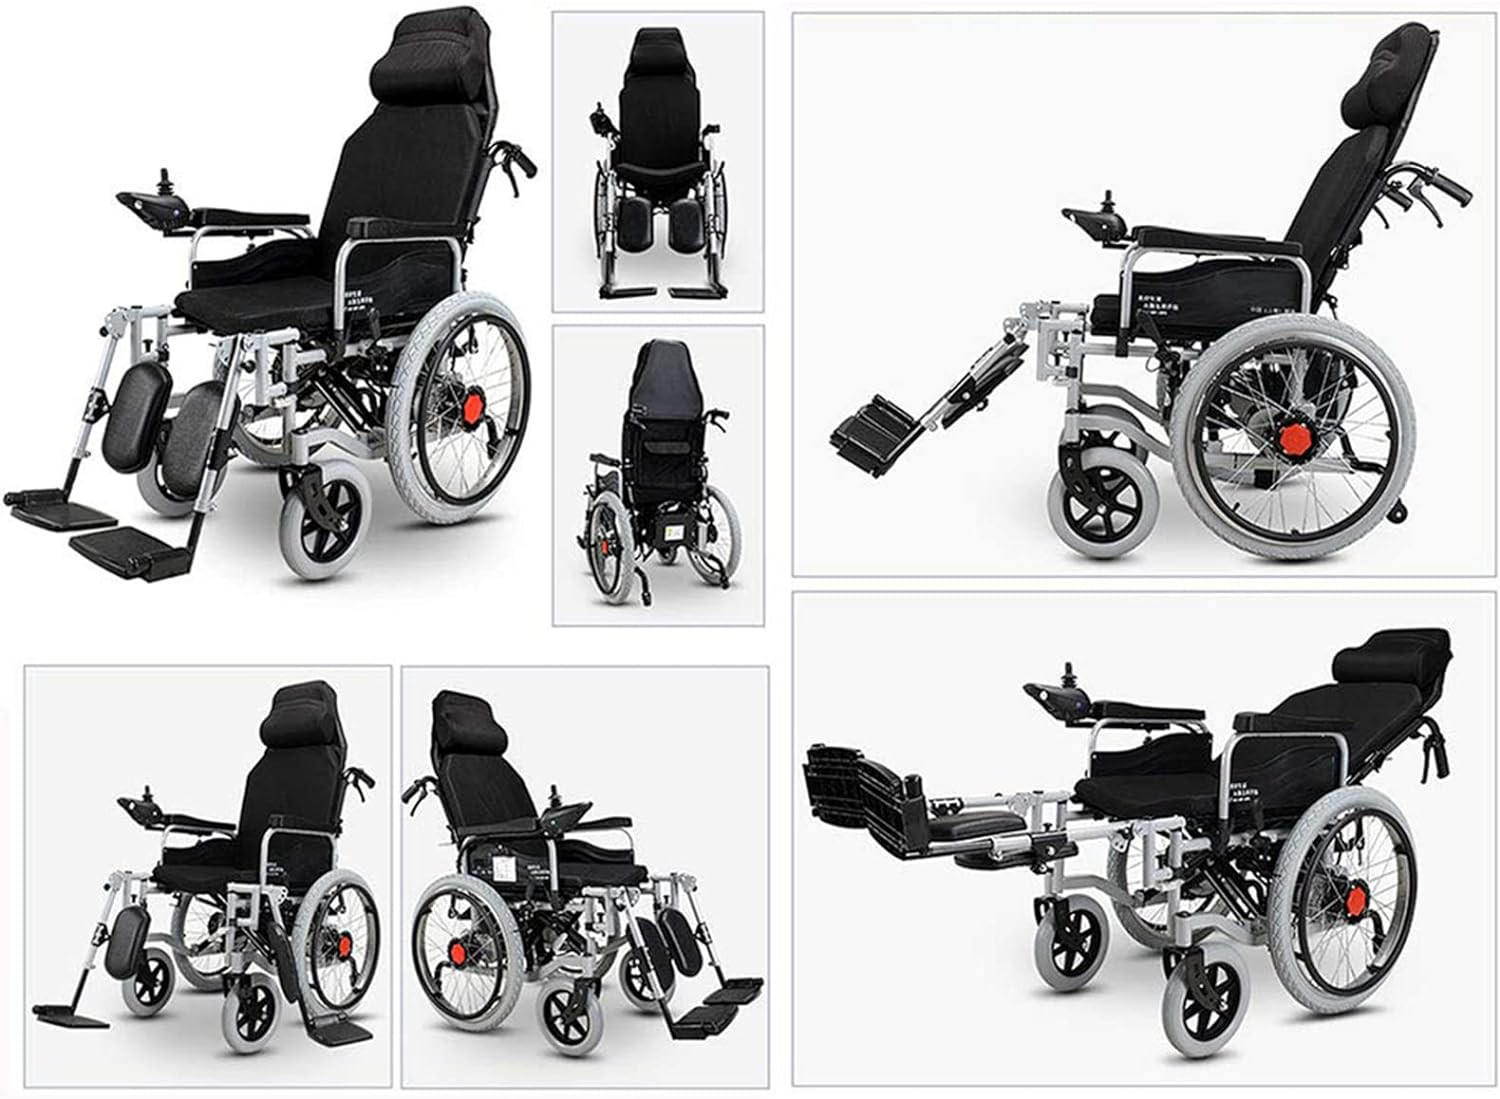 Electric Wheelchair Convertible to Manual, High Backrest, Reclining, Heavy Duty,